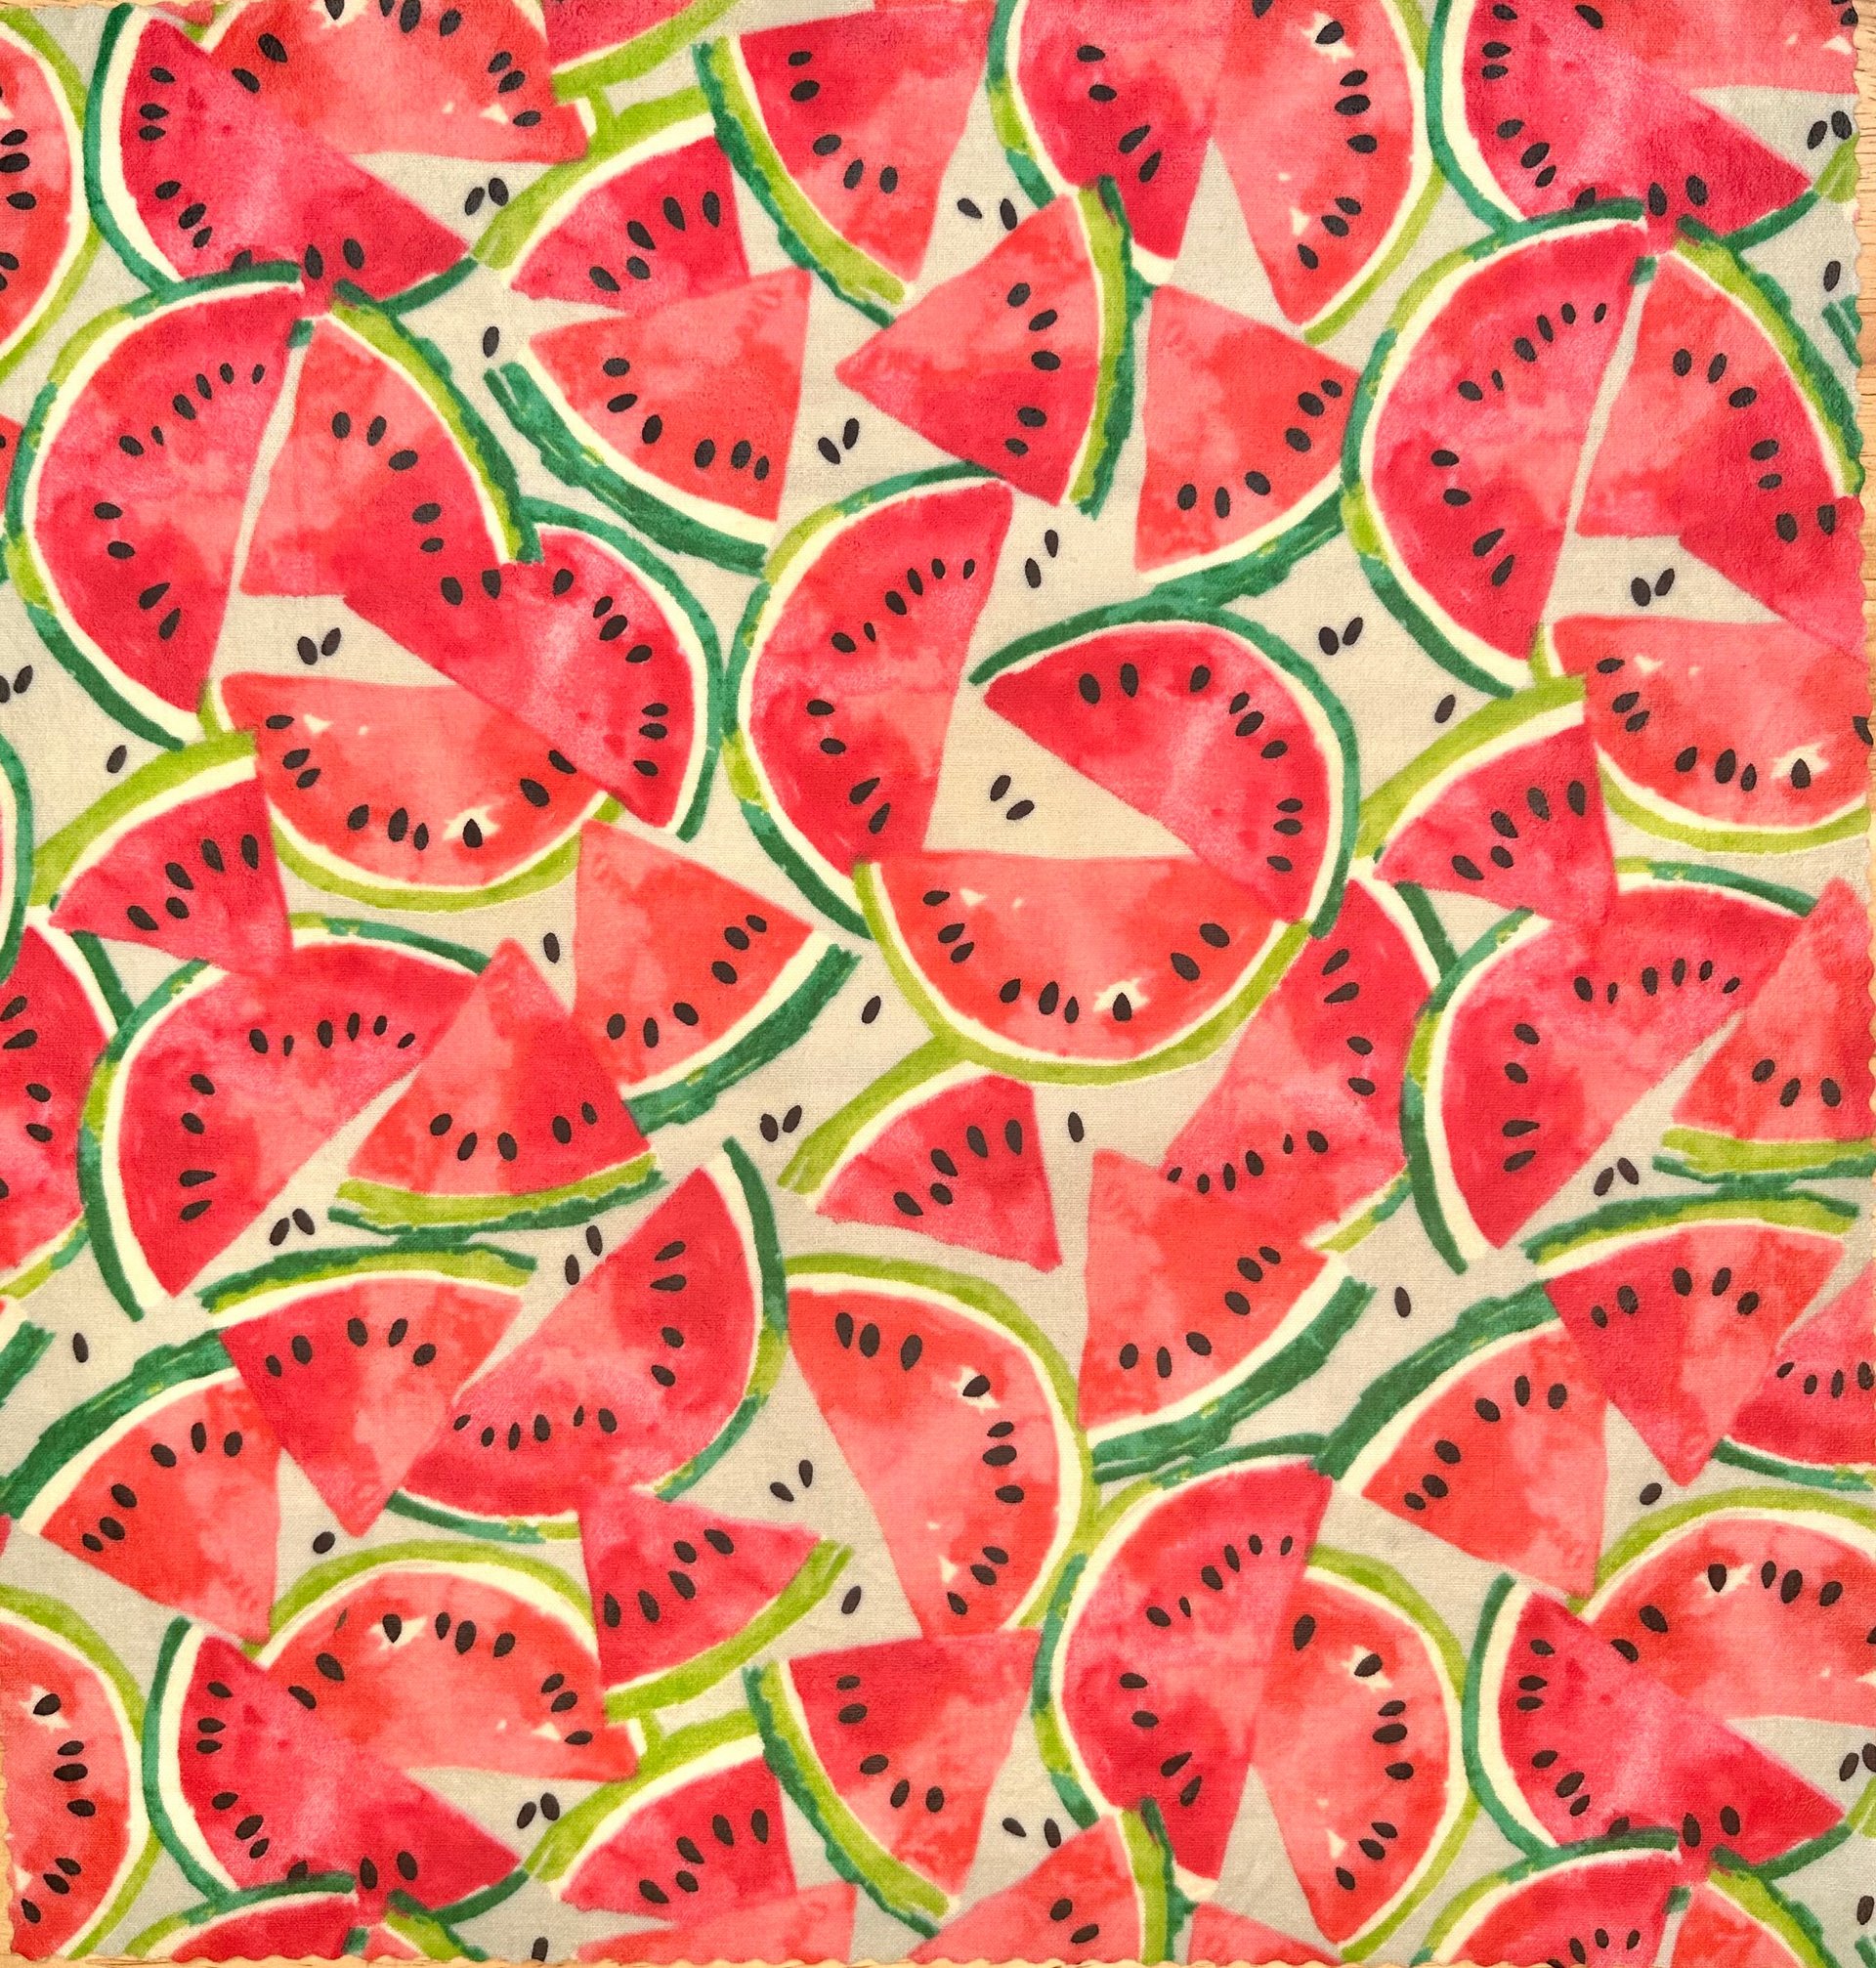 BEESWAX WRAPS 3-pack Watermelons || Reusable Food Wrap || Zero-Waste & Plastic-Free